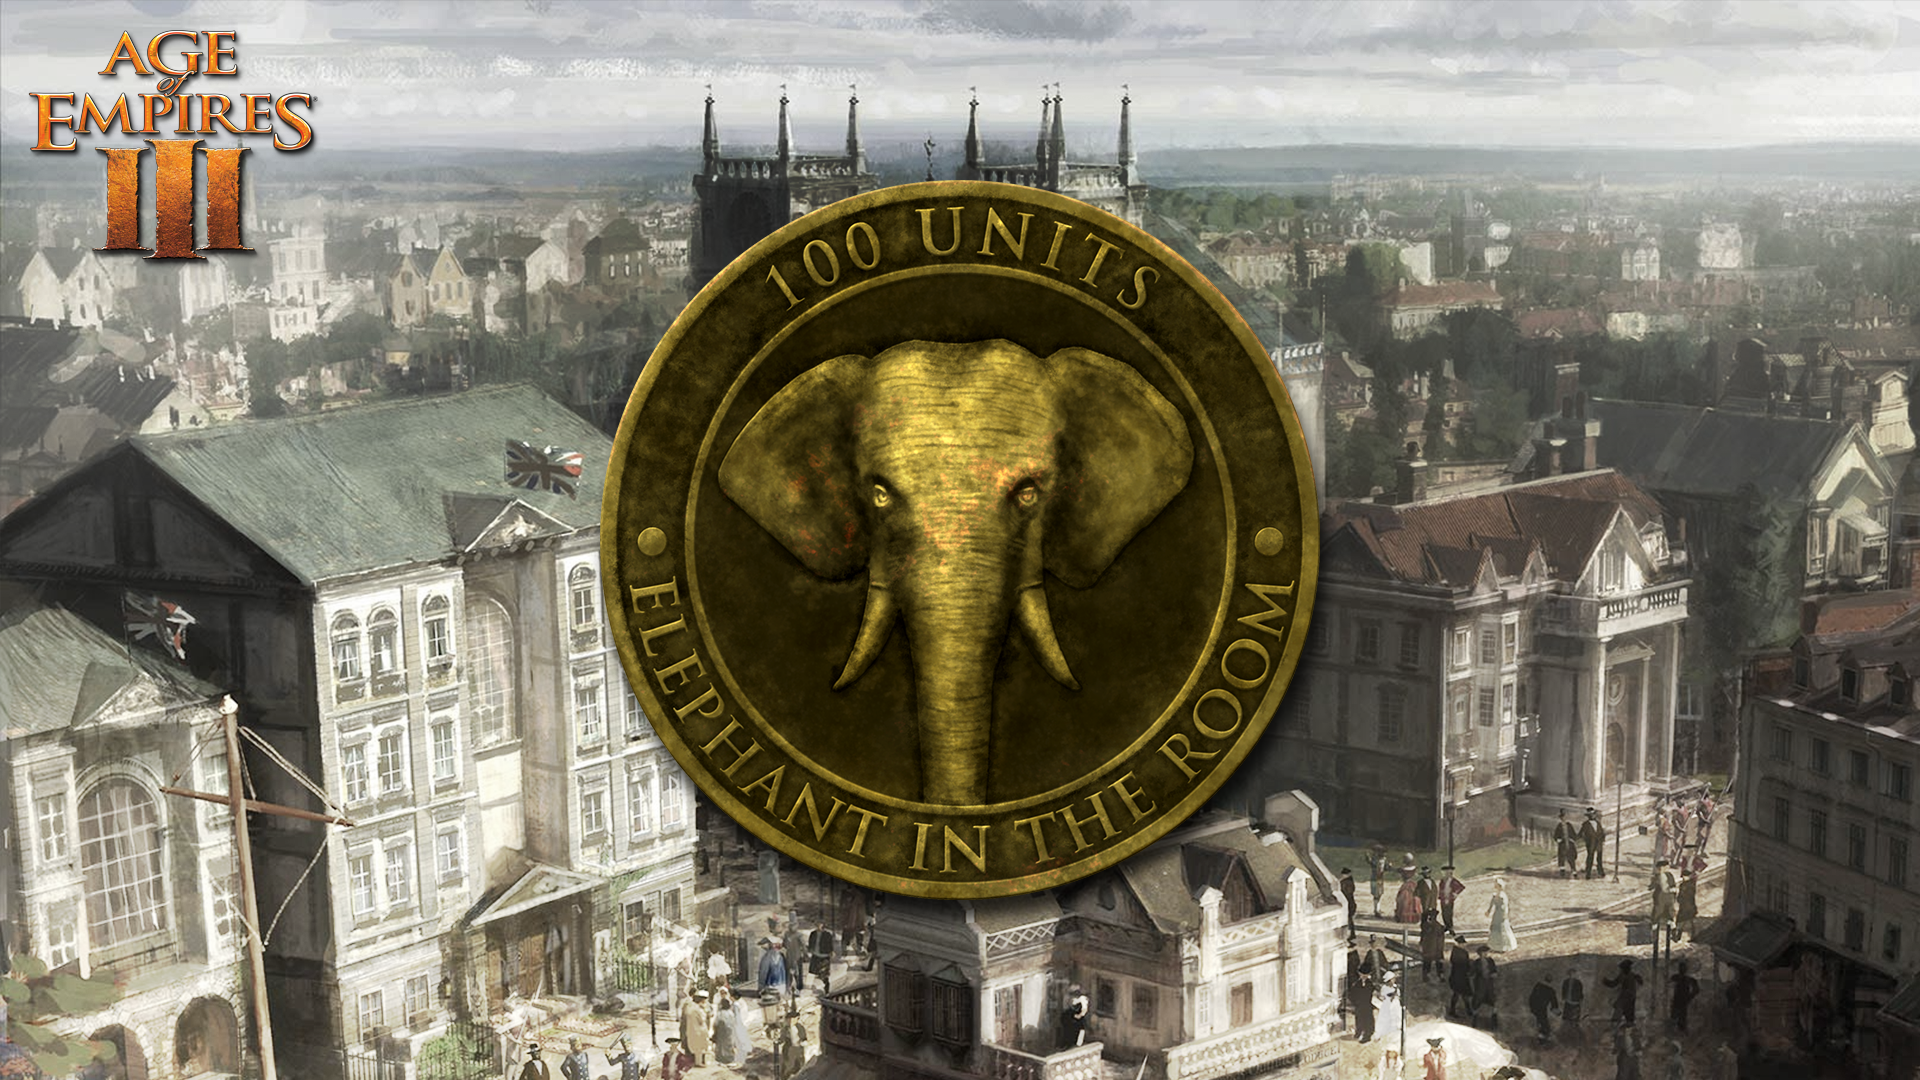 Icon for Elephant in the Room